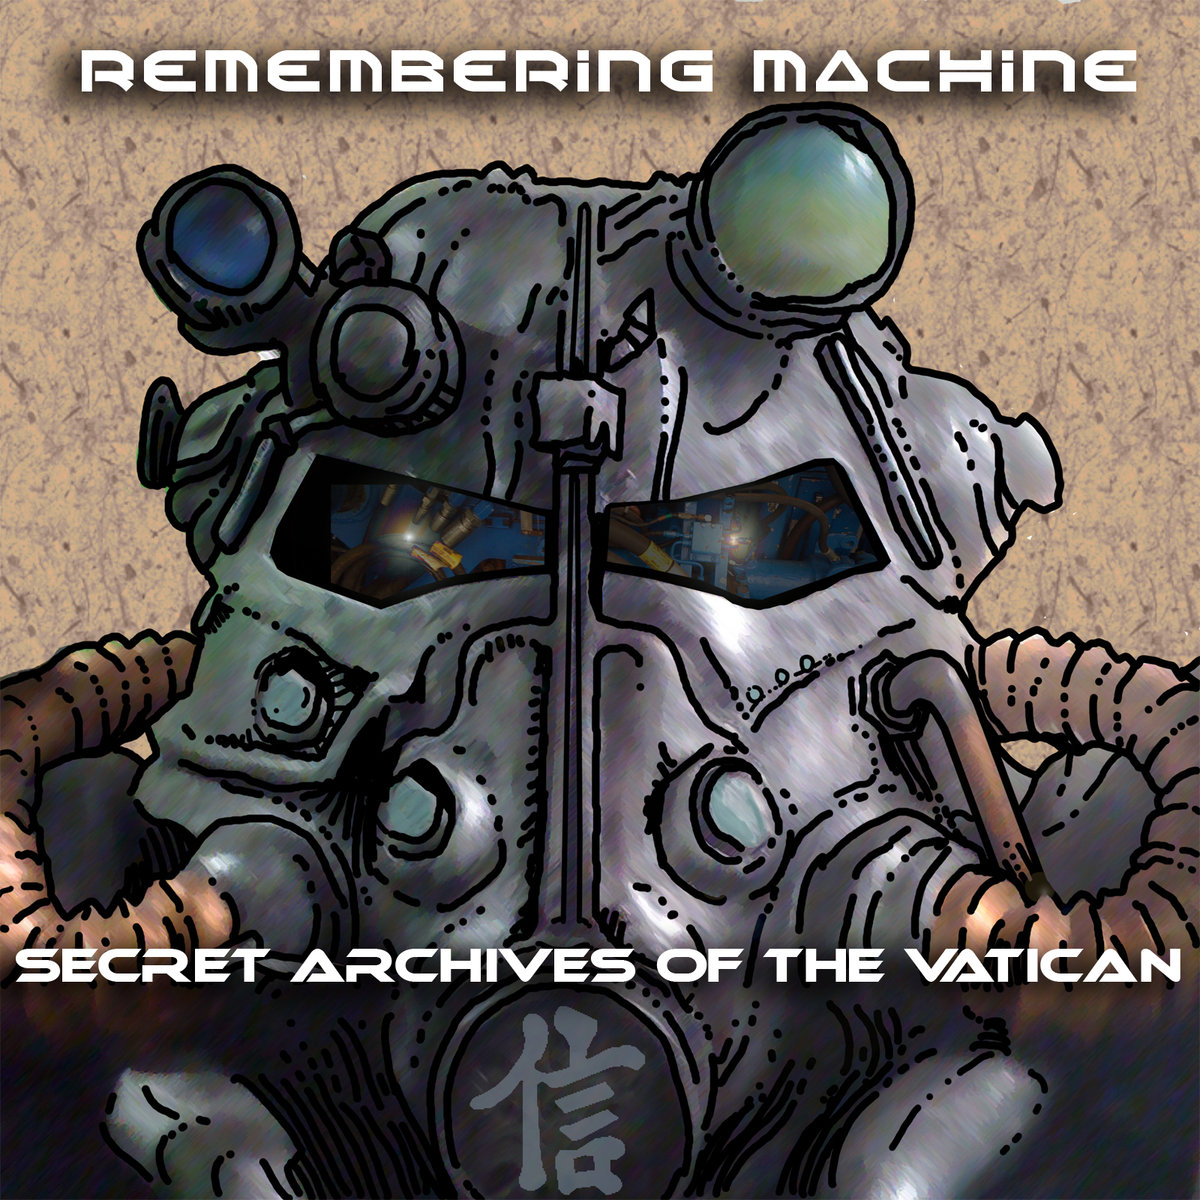 Secret Archives of the Vatican - Remembering Machine